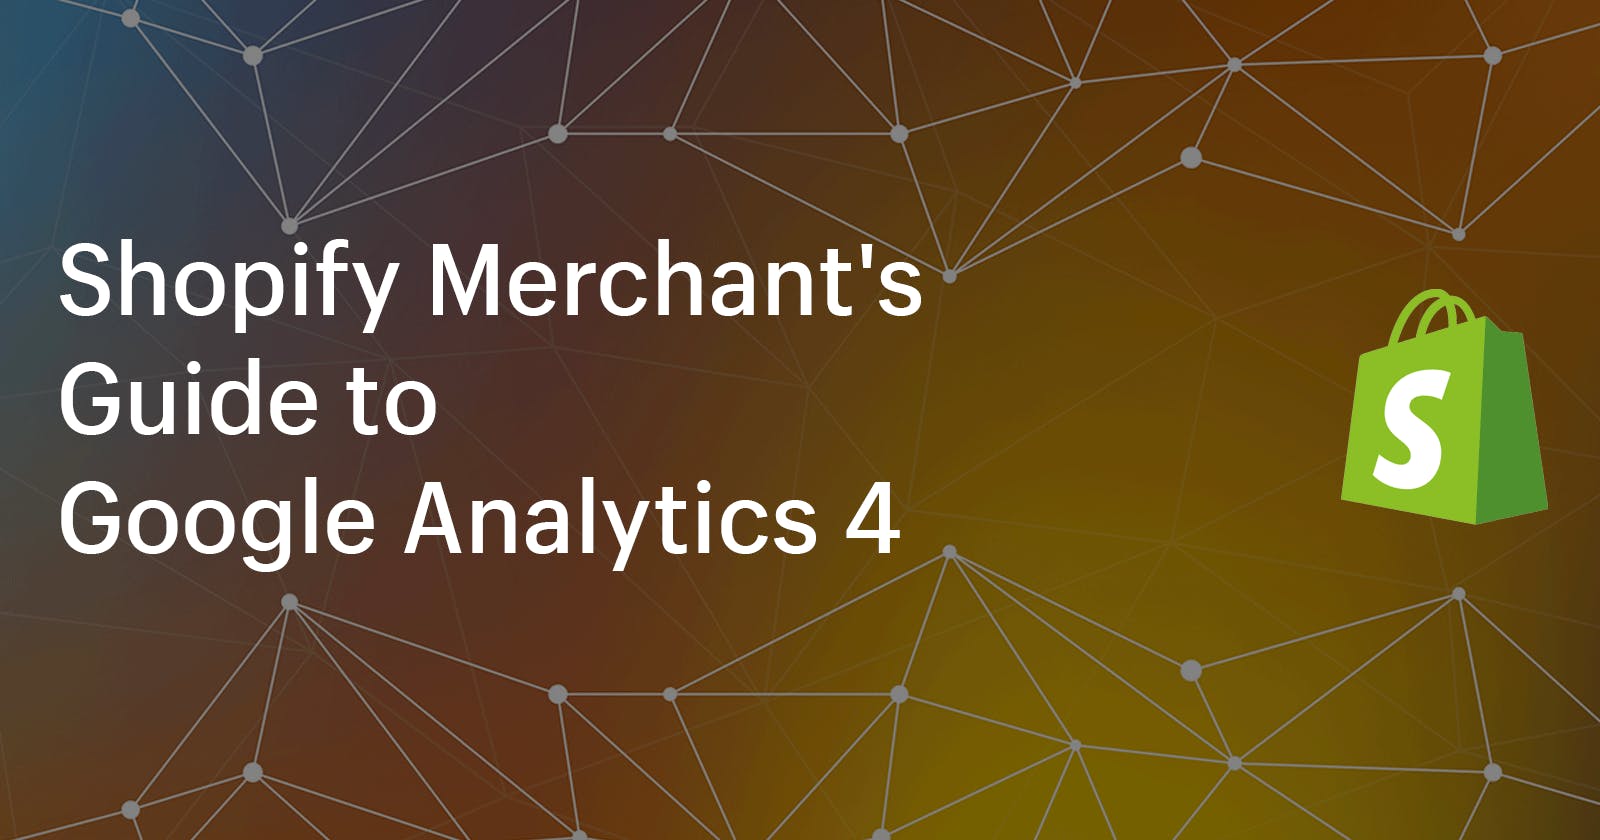 Shopify Merchant's Guide to Google Analytics 4